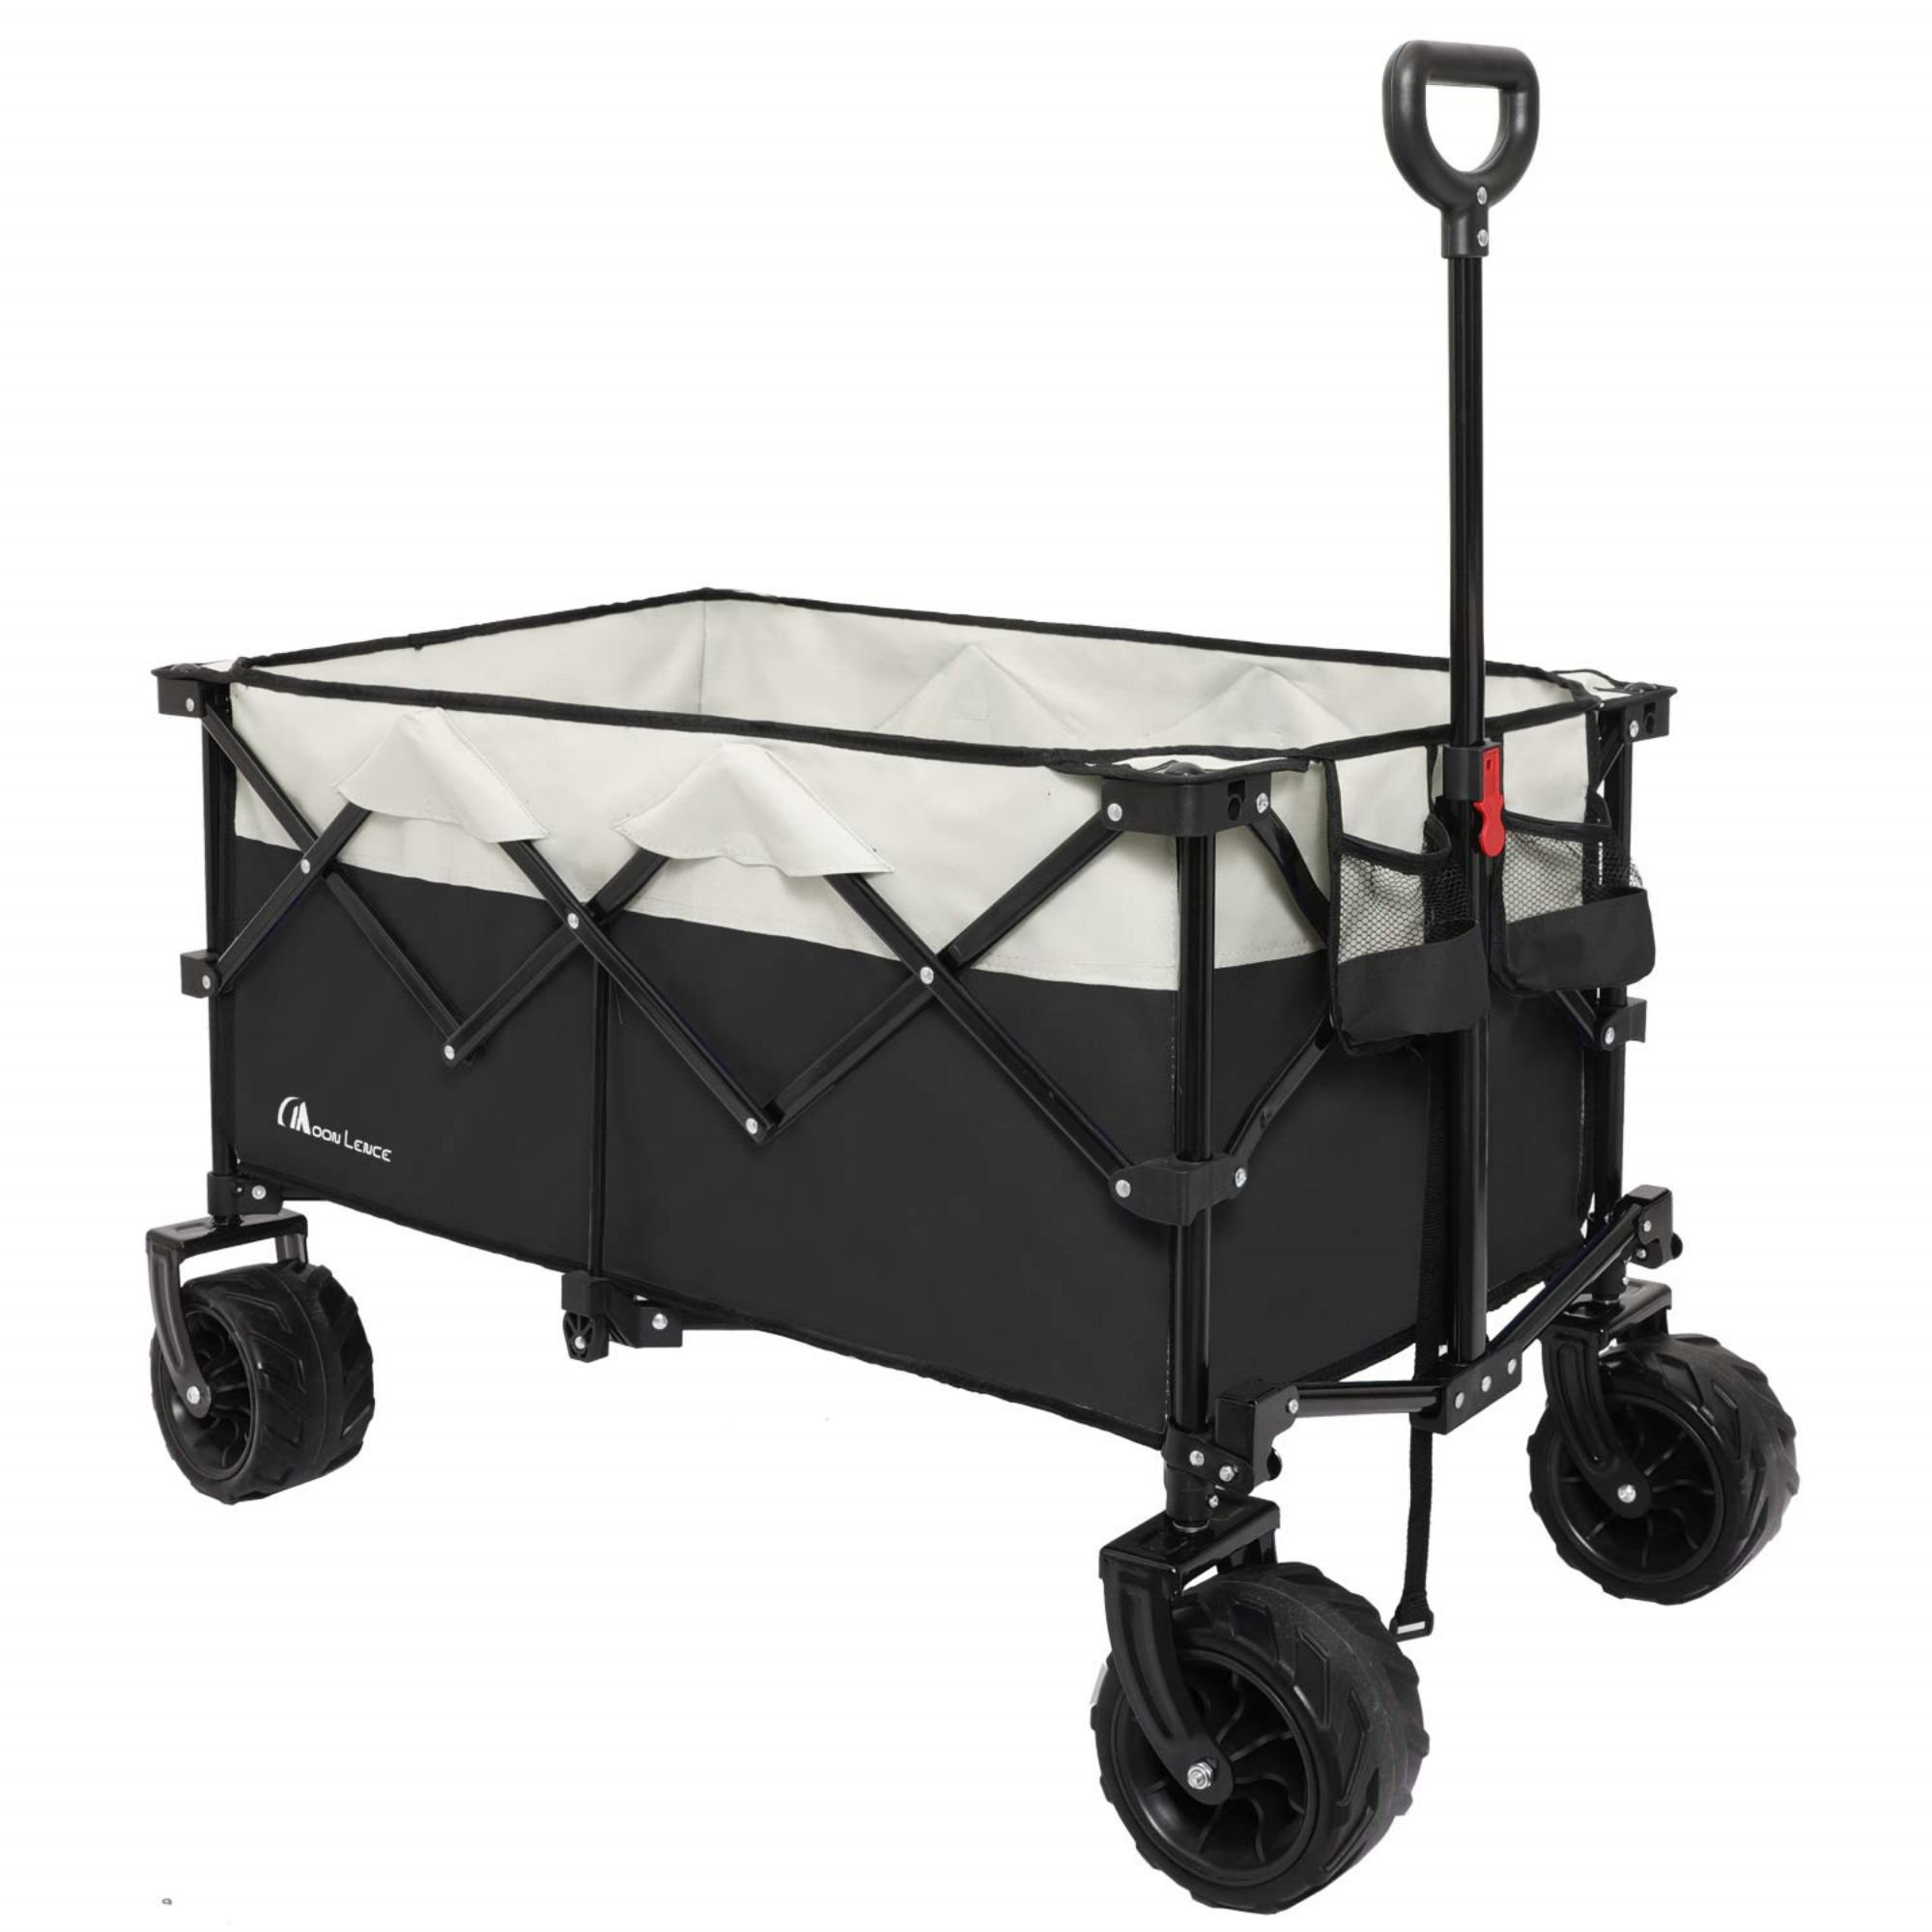 Folding Utility Beach Cart Collapsible Folding Outdoor Utility Wagon Wide Wheels 